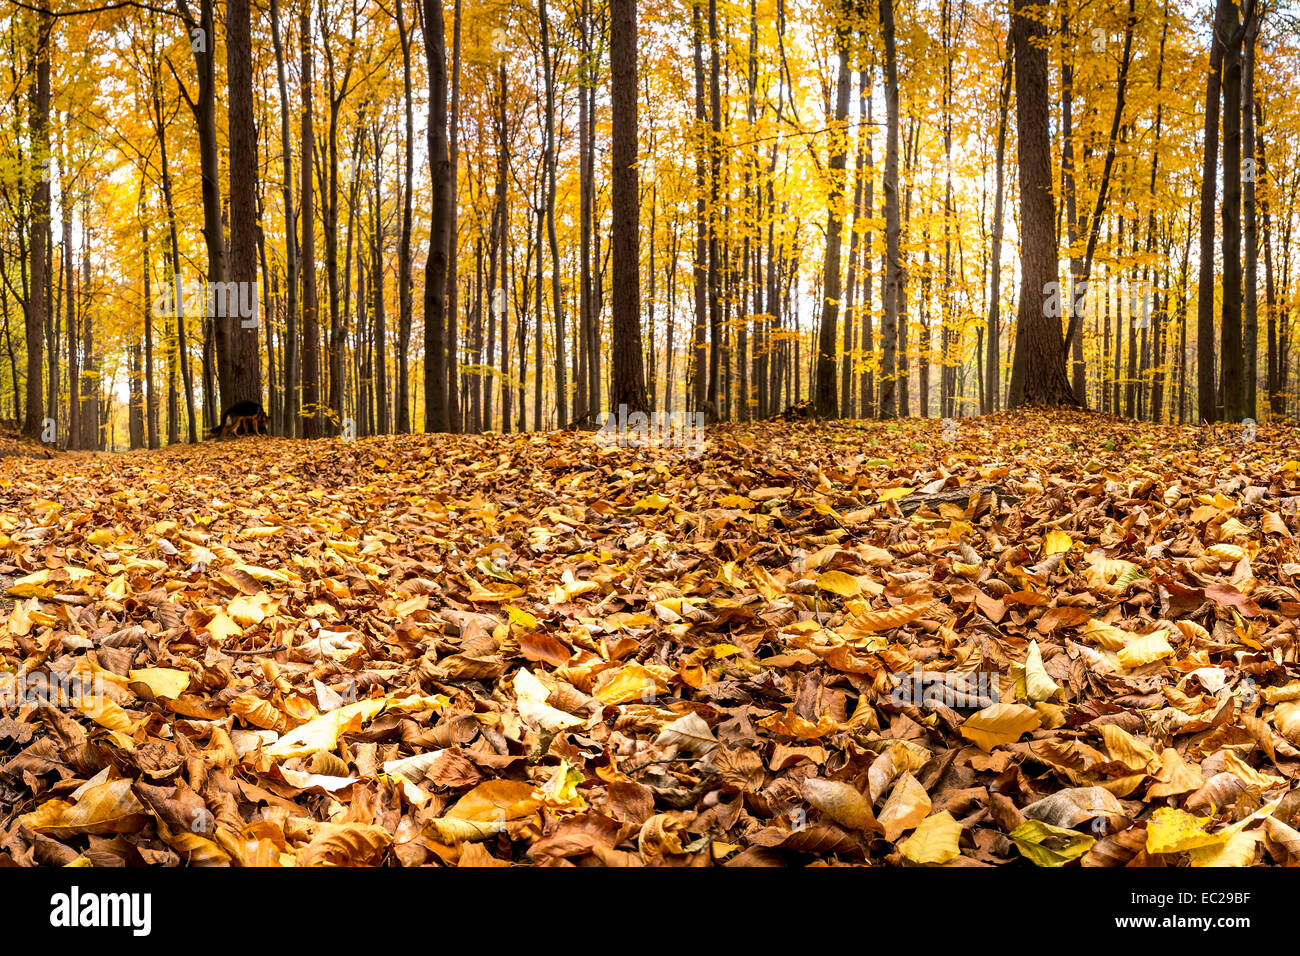 Forest in autumn with dead leaves lying on the ground Stock Photo